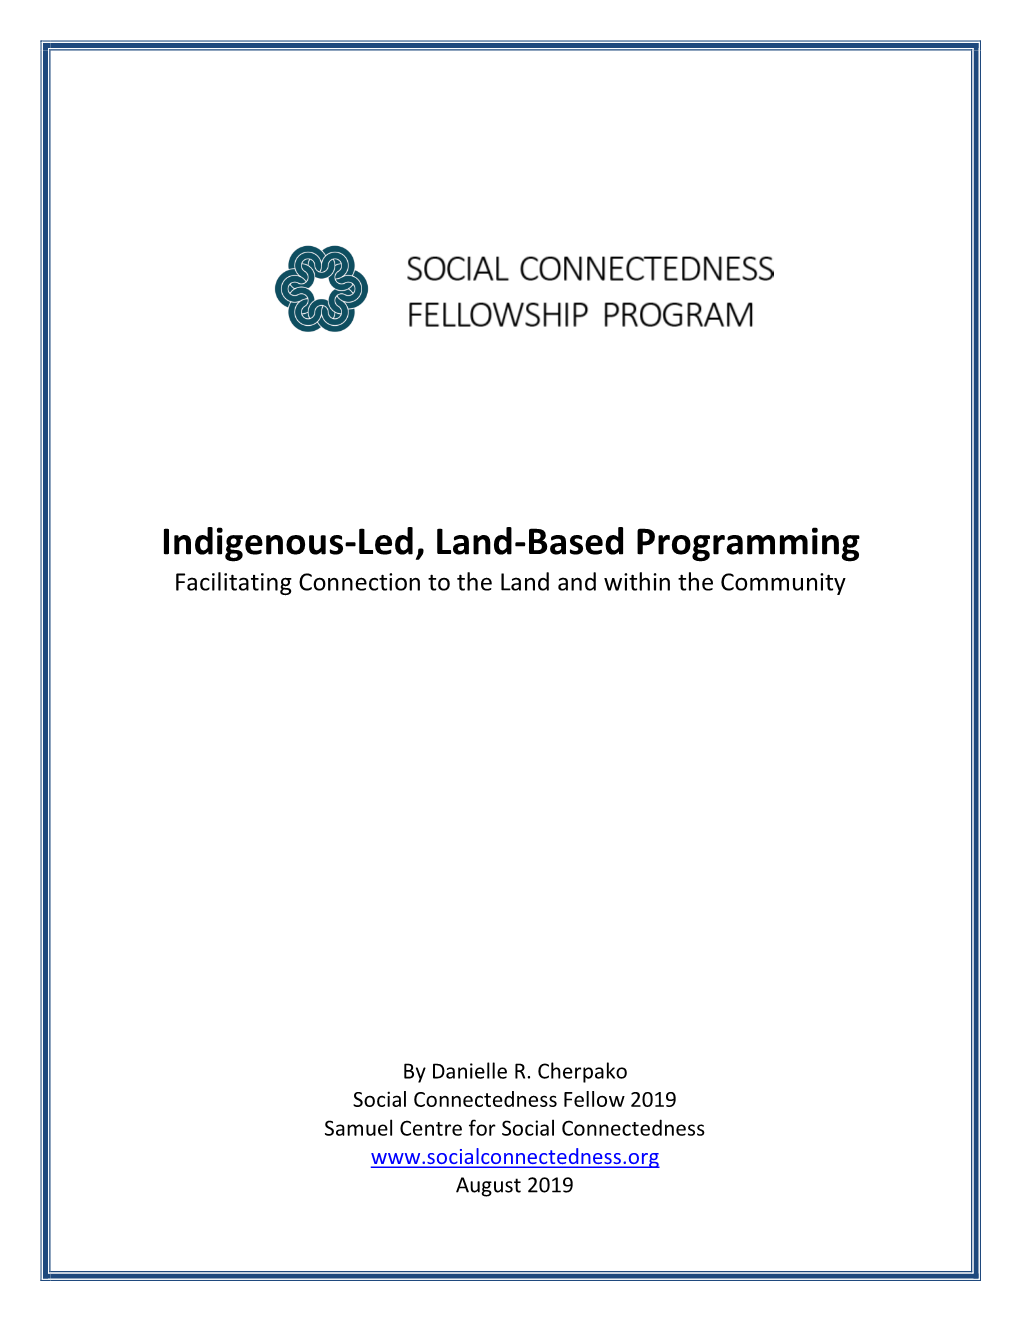 Indigenous-Led, Land-Based Programming Facilitating Connection to the Land and Within the Community